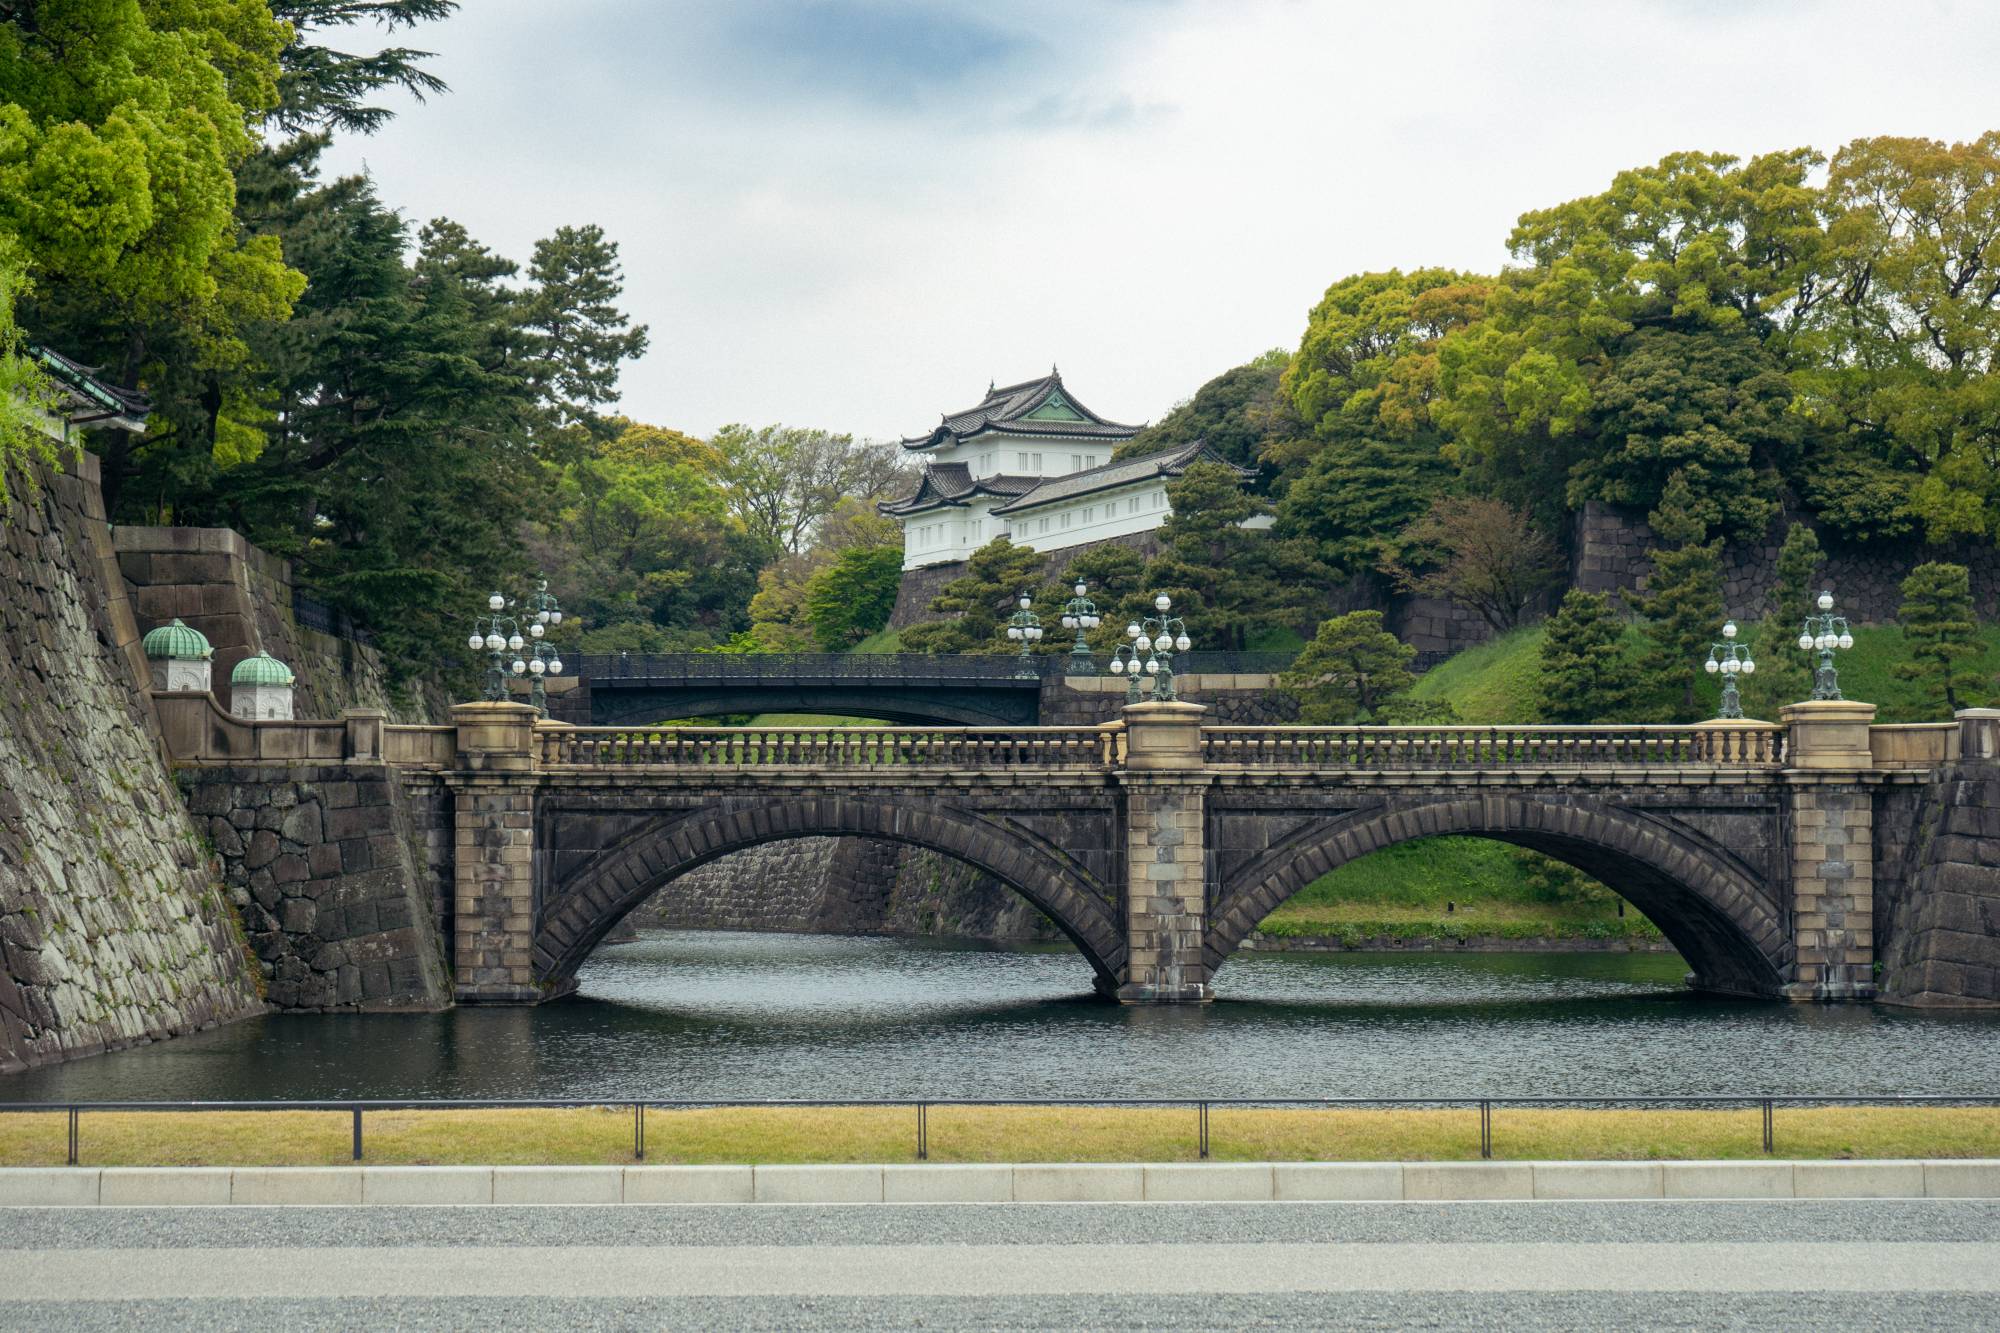 The Imperial Palace saw around 2.2 million visitors in 2019 and here, at one of the main viewing points for its keep, you can normally get your photo taken by a professional photographer who spends all day just doing that. He was gone, as were all the other visitors. | OSCAR BOYD